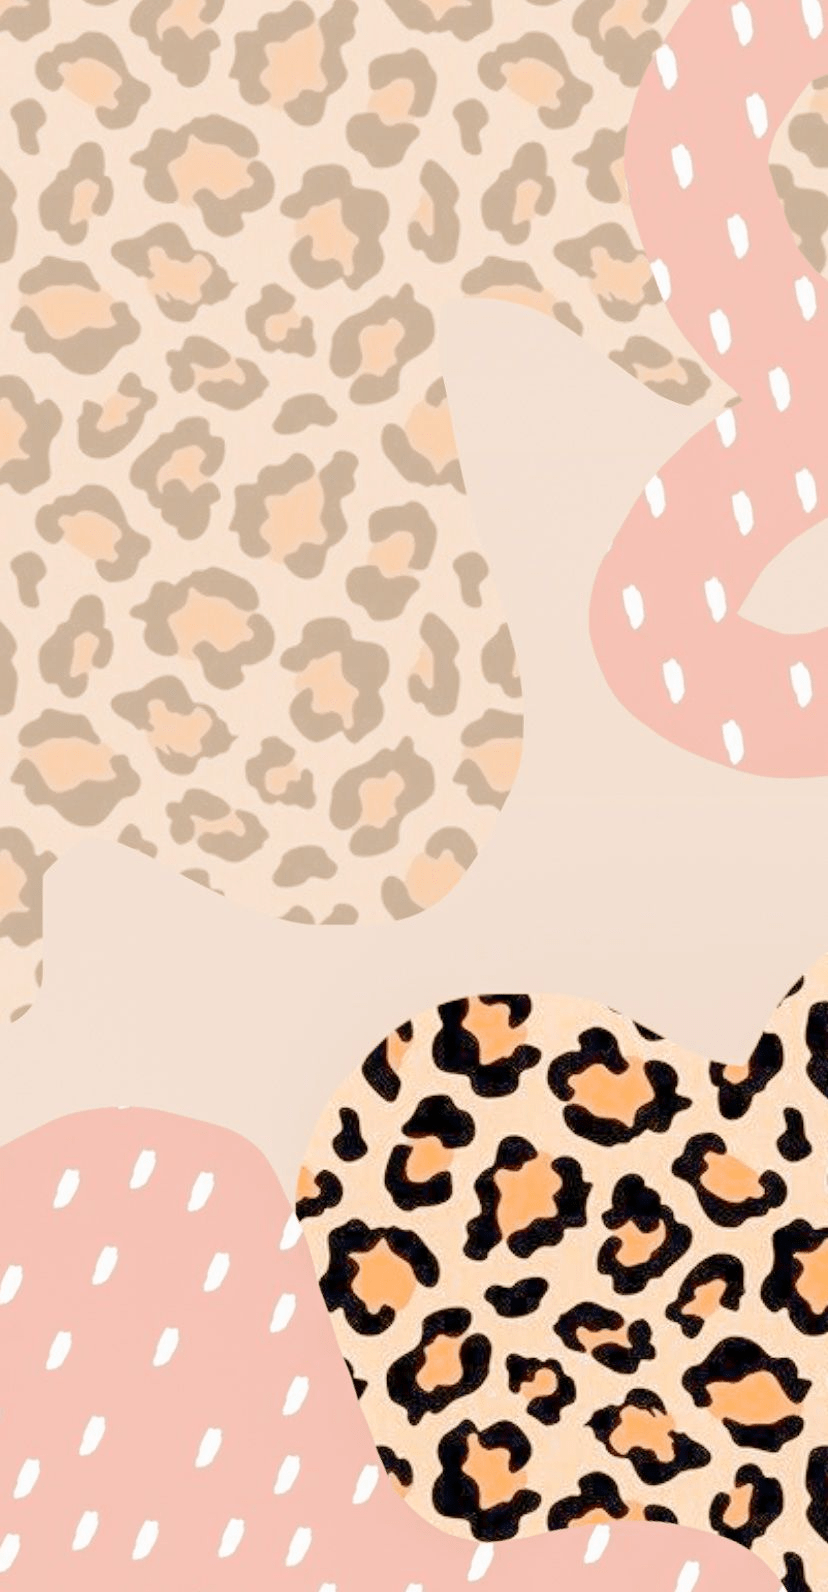 IPhone wallpaper with a combination of animal prints - VSCO